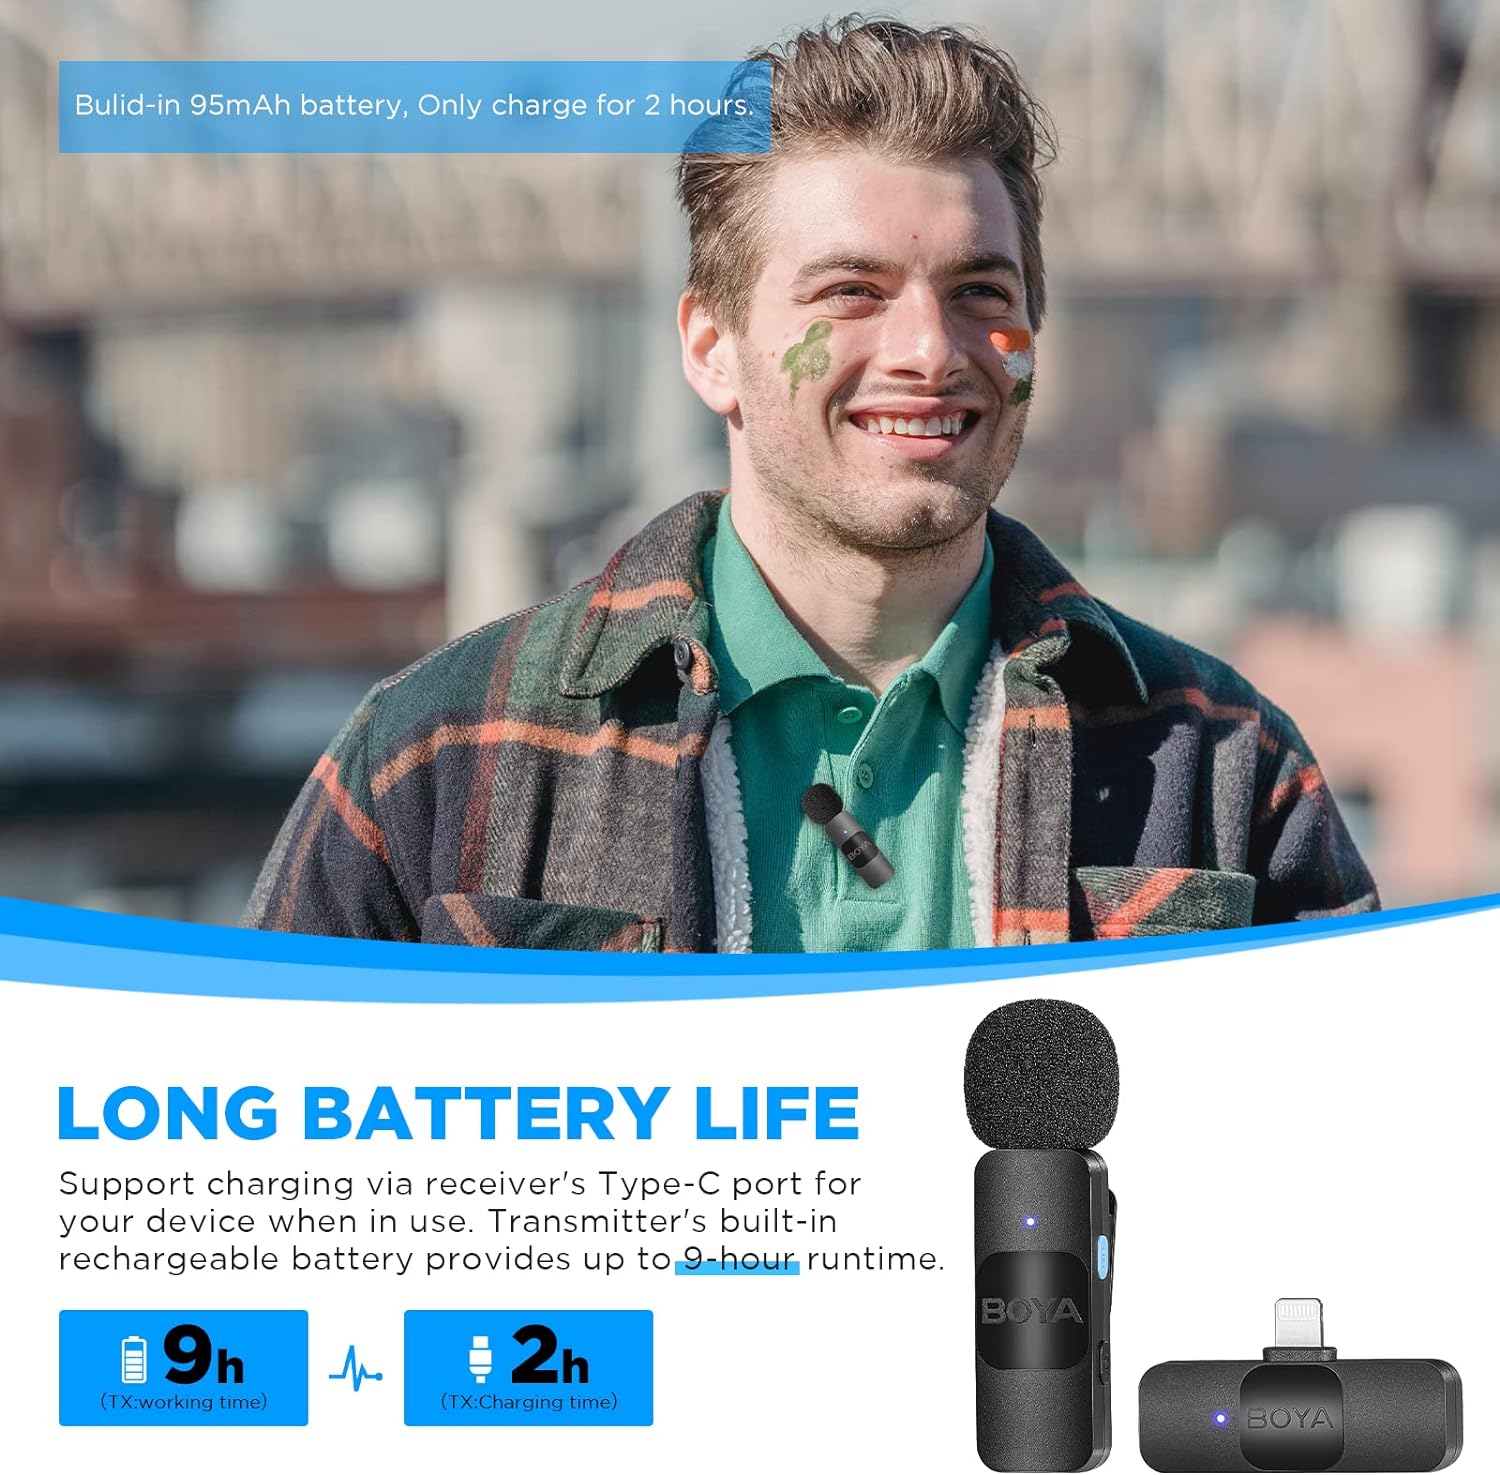 BOYA Wireless Lavalier Lapel Microphone for iPhone iPad - Dual Mini Omnidirectional Condenser Video Recording Mic for Interview Podcast Vlog YouTube Live Stream (TX+TX+RX)